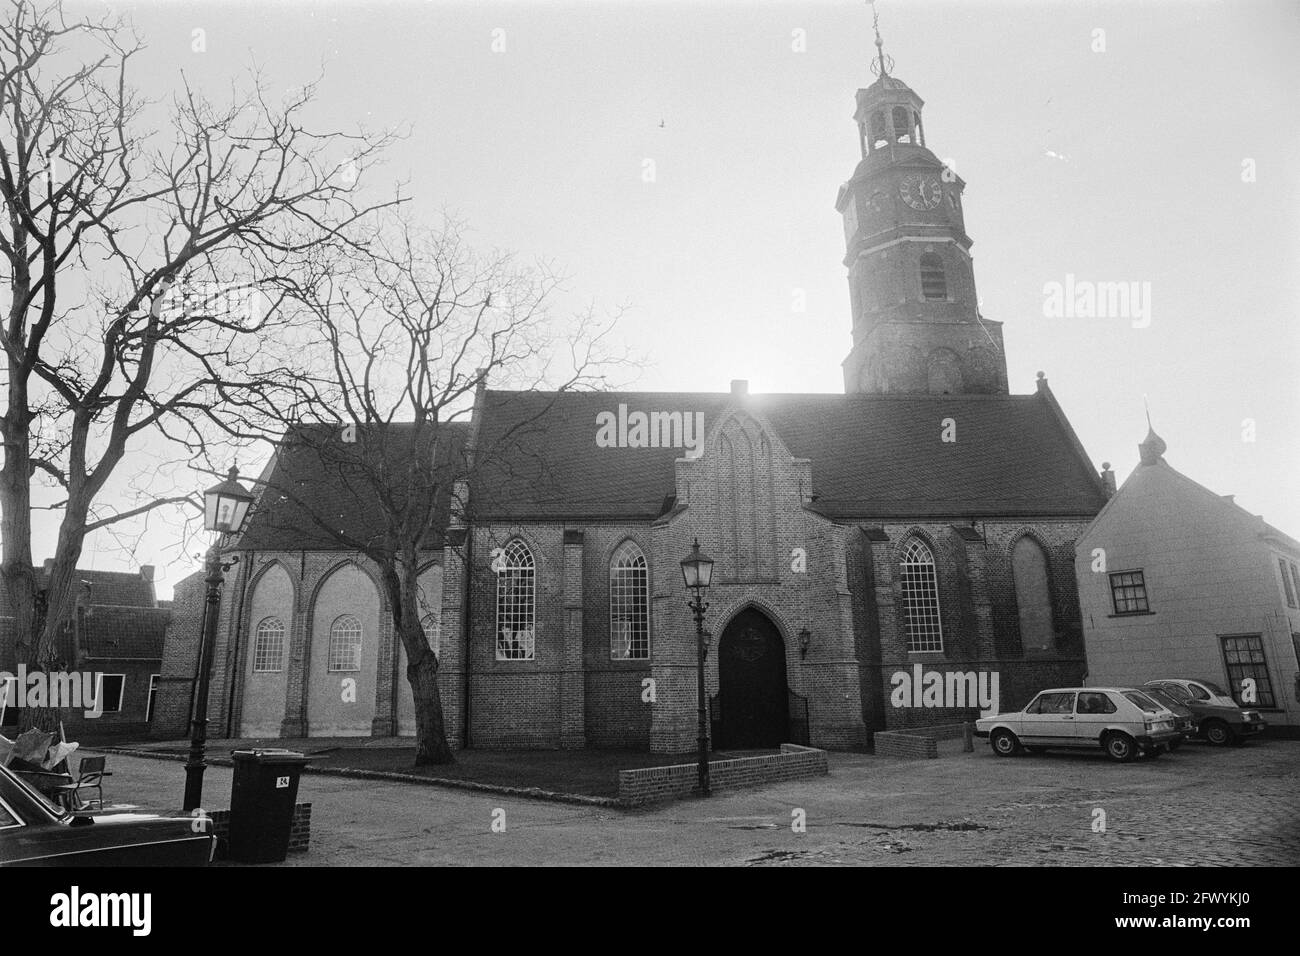 Restoration St. Lambertus church in Betuwe Buren, where in 1551 Willem de Zwijger married Anna van Buren ready and where daughter Maria of Orange was buried, November 20, 1980, exteriors, churches, restorations, The Netherlands, 20th century press agency photo, news to remember, documentary, historic photography 1945-1990, visual stories, human history of the Twentieth Century, capturing moments in time Stock Photo